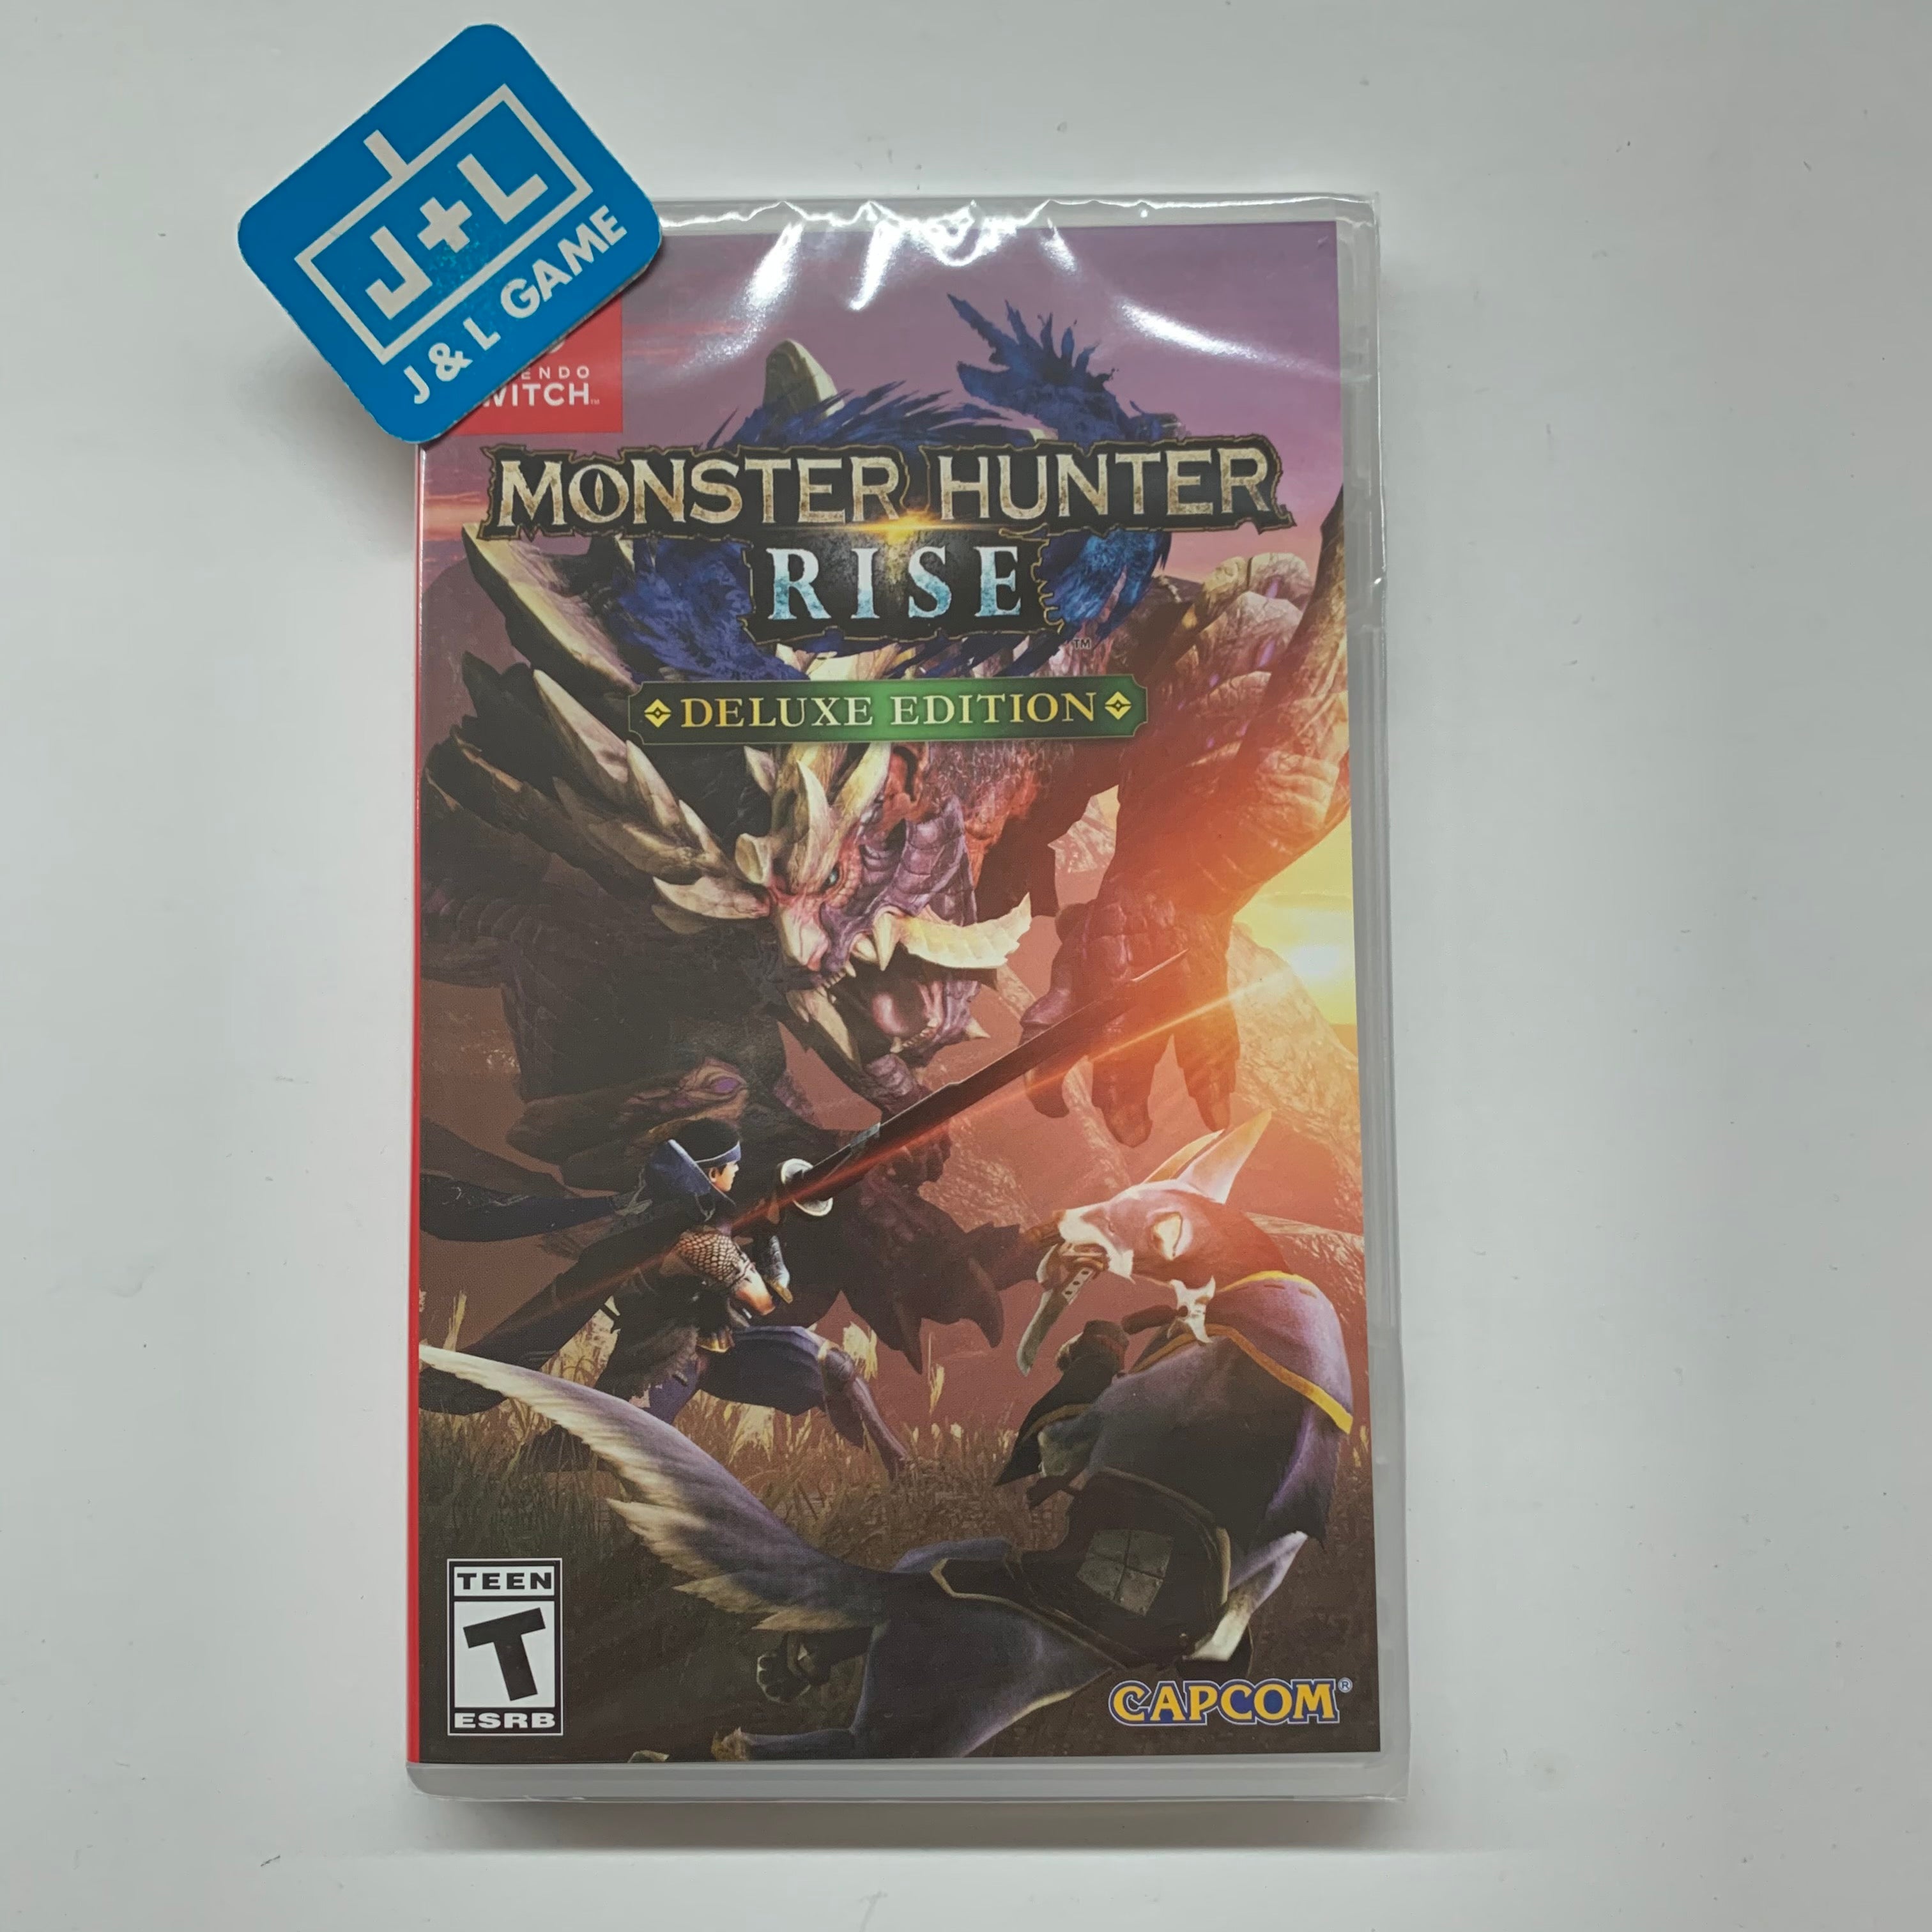 Monster Hunter Rise Deluxe Edition - (NSA) Nintendo Switch Video Games Capcom   